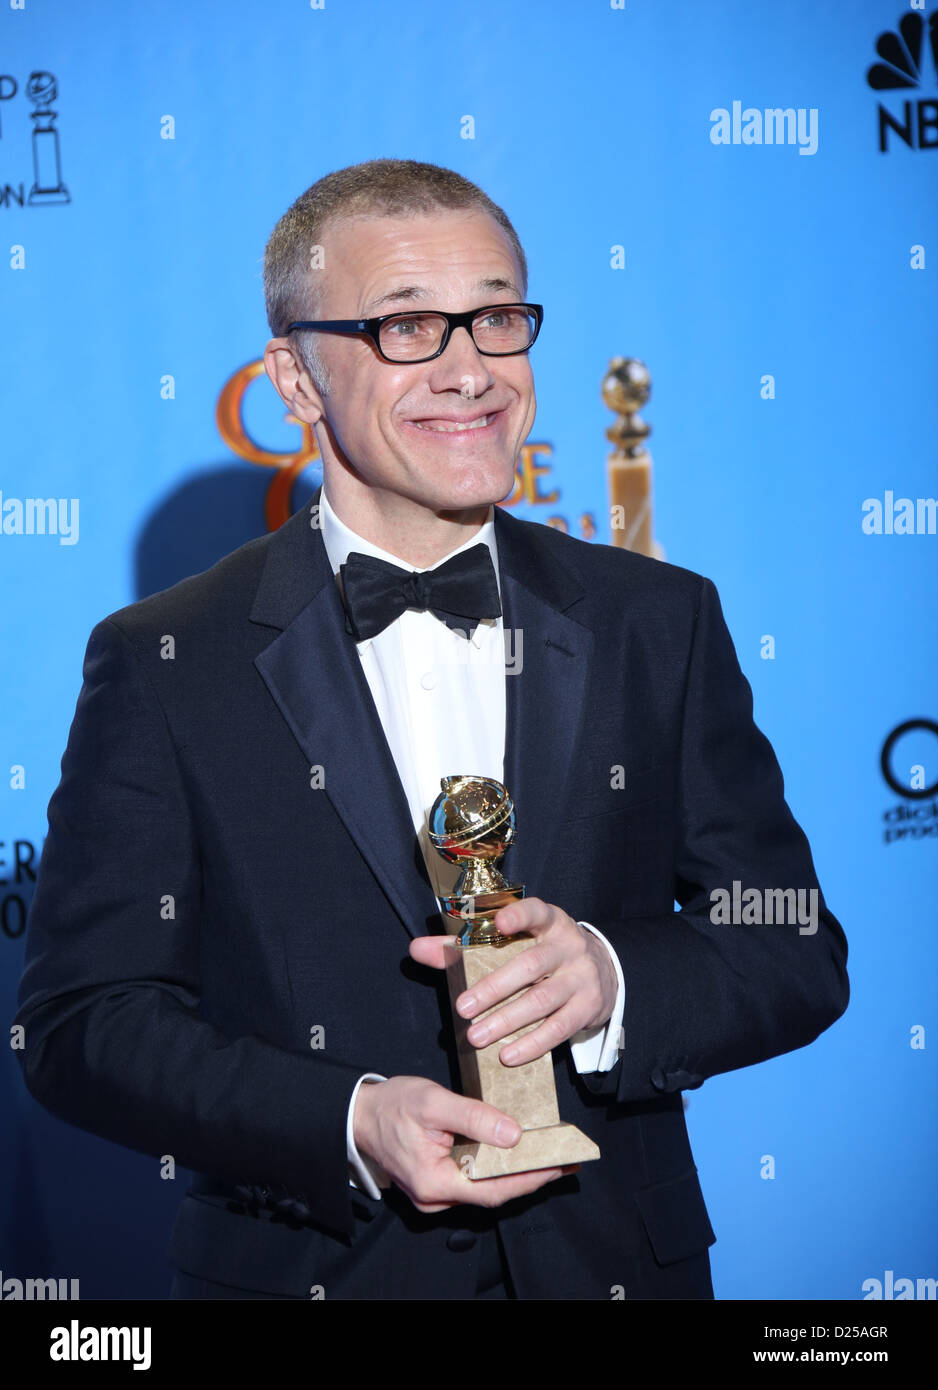 Best Actor in a Supporting Role Winner Christoph Waltz poses in the photo press room of the 70th Annual Golden Globe Awards presented by the Hollywood Foreign Press Association, HFPA, at Hotel Beverly Hilton in Beverly Hills, USA, on 13 January 2013. Photo: Hubert Boesl Stock Photo